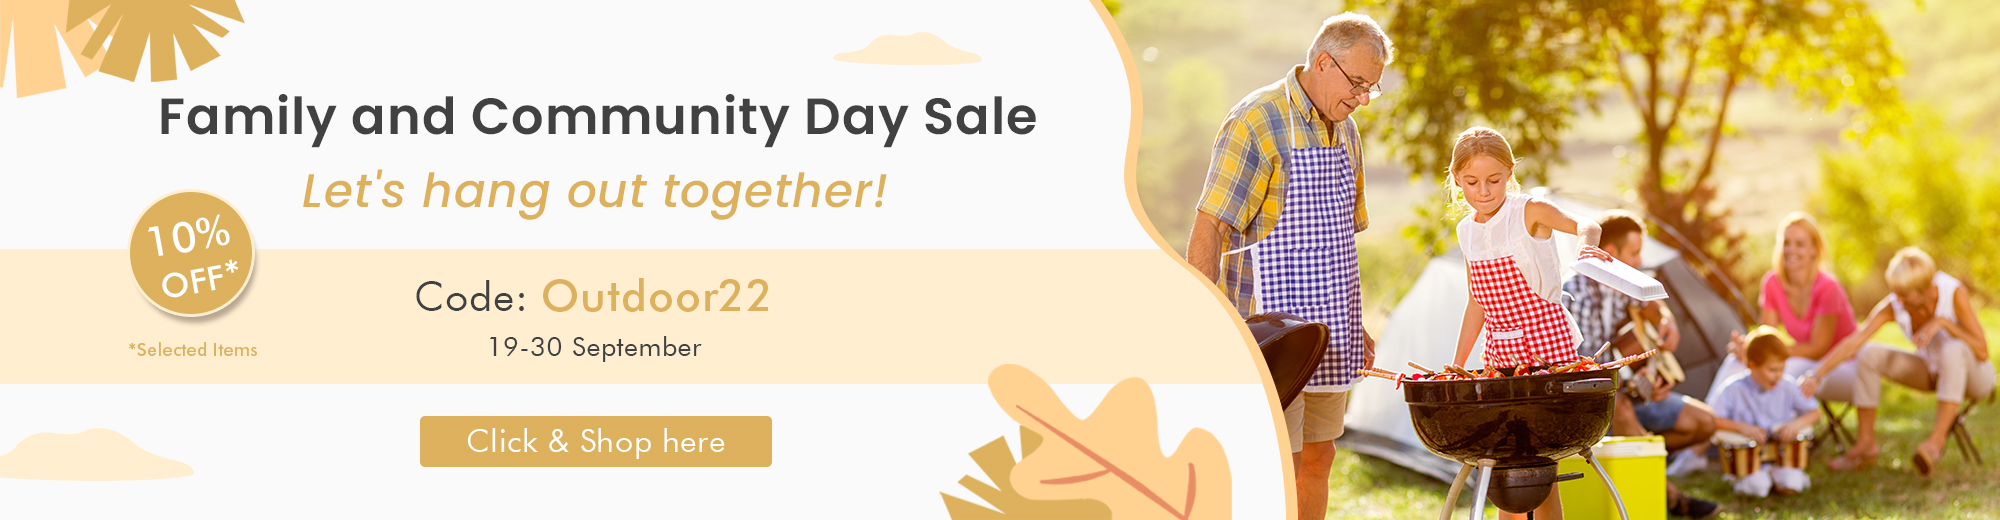 Family and Community Day Sale